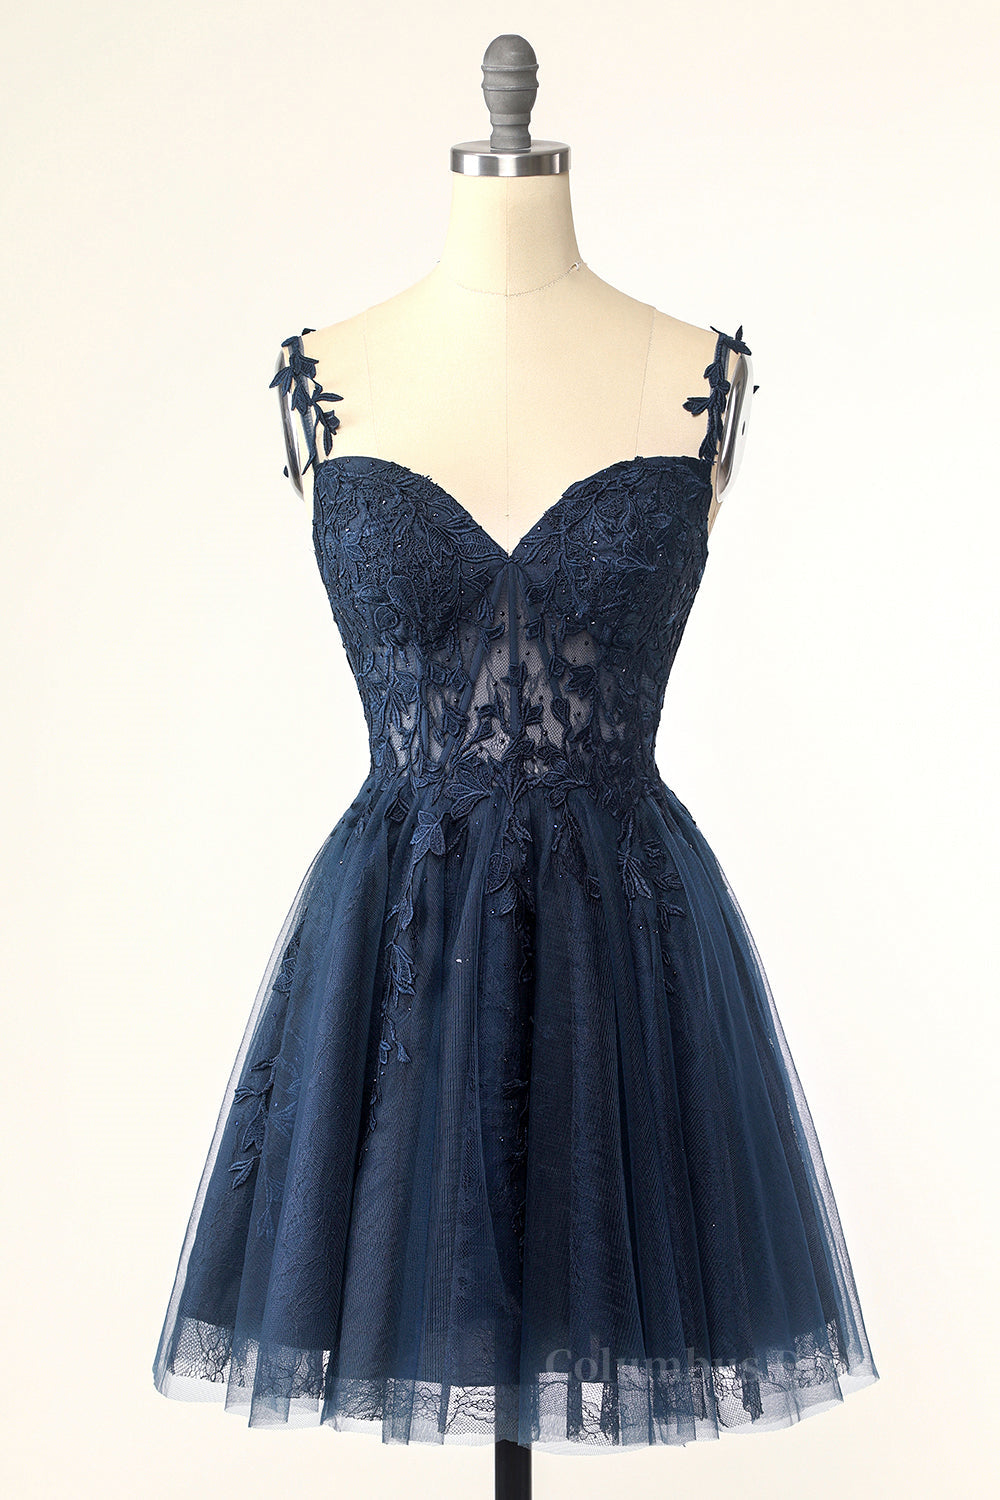 Country Wedding Dress, Navy Blue A-line Lace Appliques Short Homecoming Dress